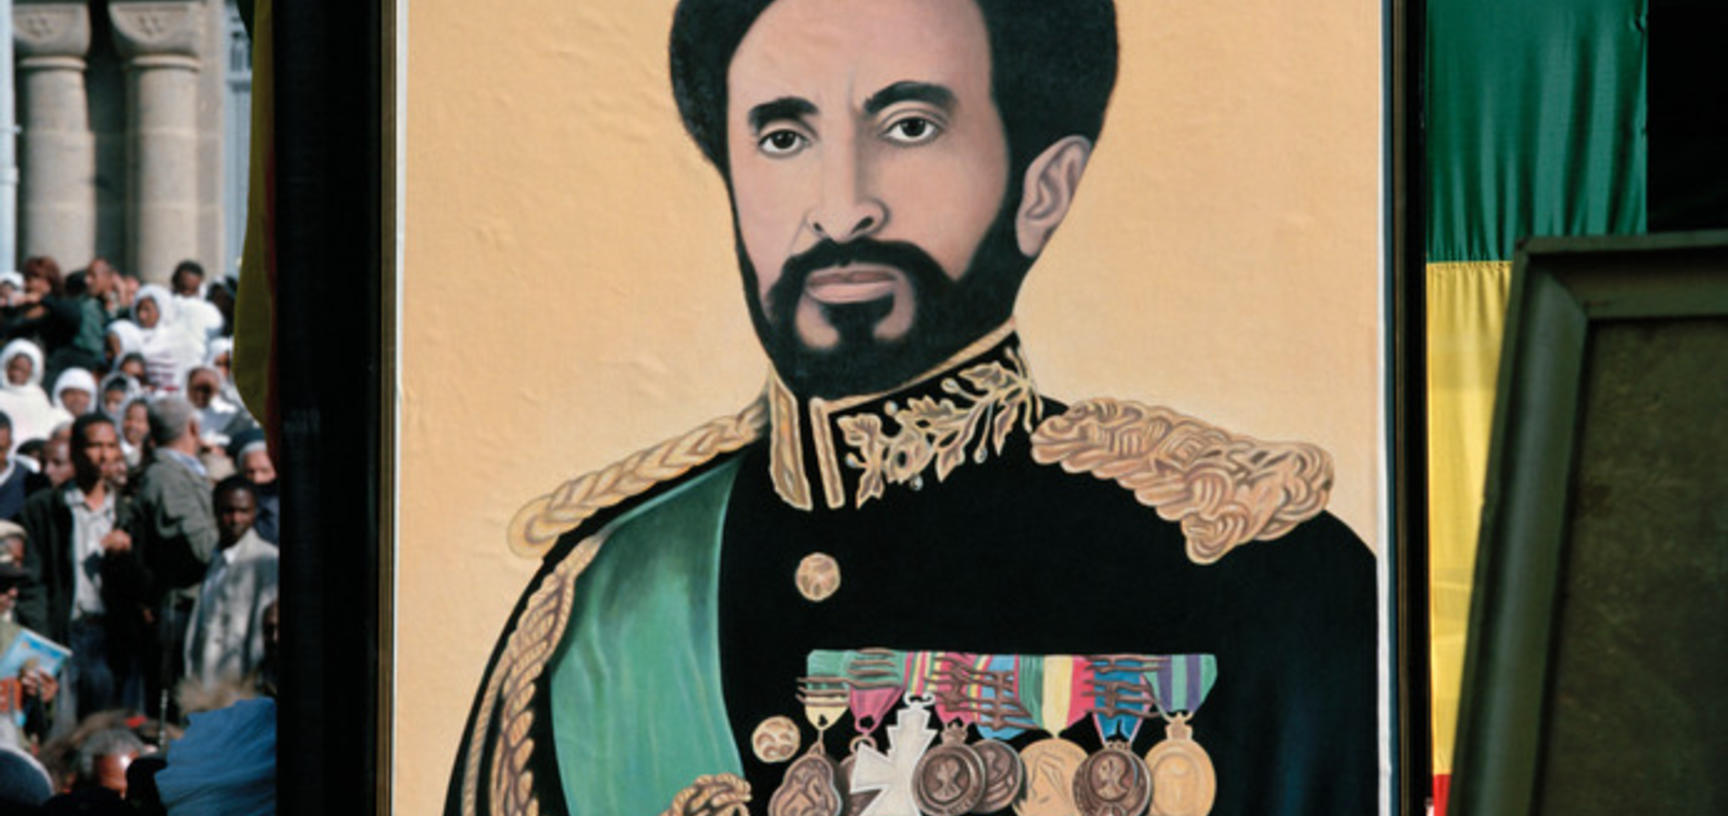 A portrait of Emperor Haile Selassie, displayed as part of the funeral cortège. Addis Ababa, Ethiopia. Photograph by Peter Marlow. 2000.